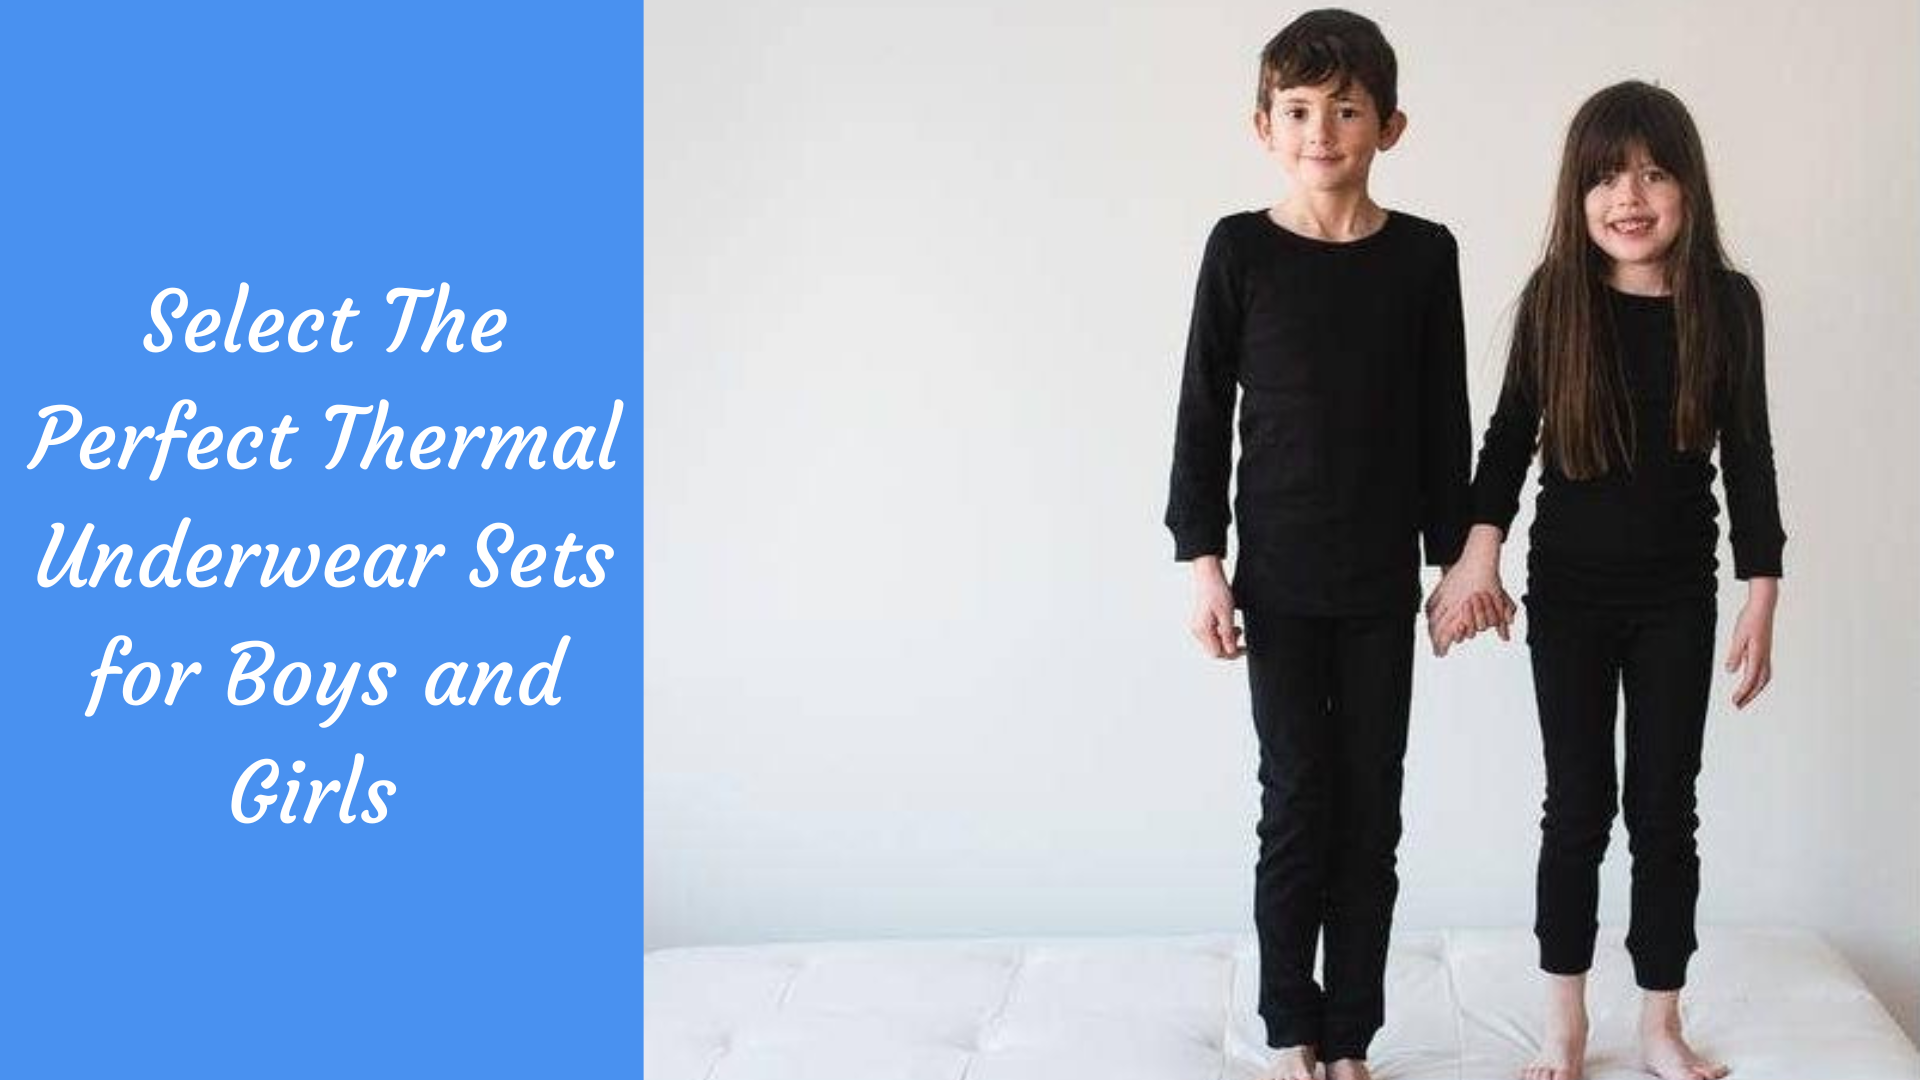 Select The Perfect Thermal Underwear Sets For Boys And Girls